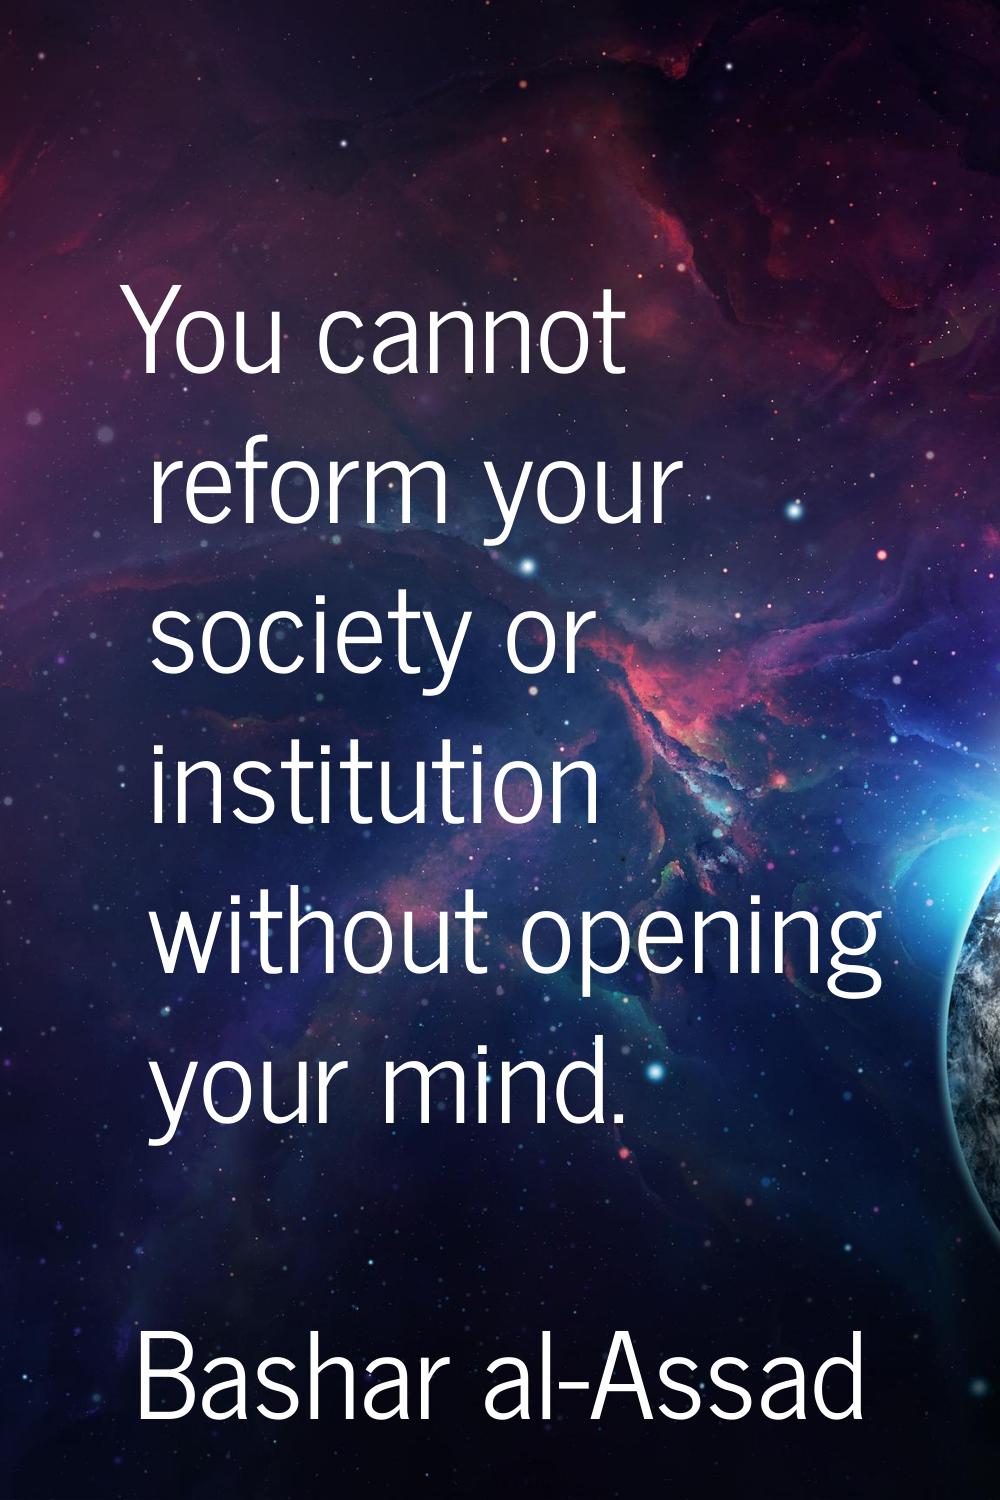 You cannot reform your society or institution without opening your mind.